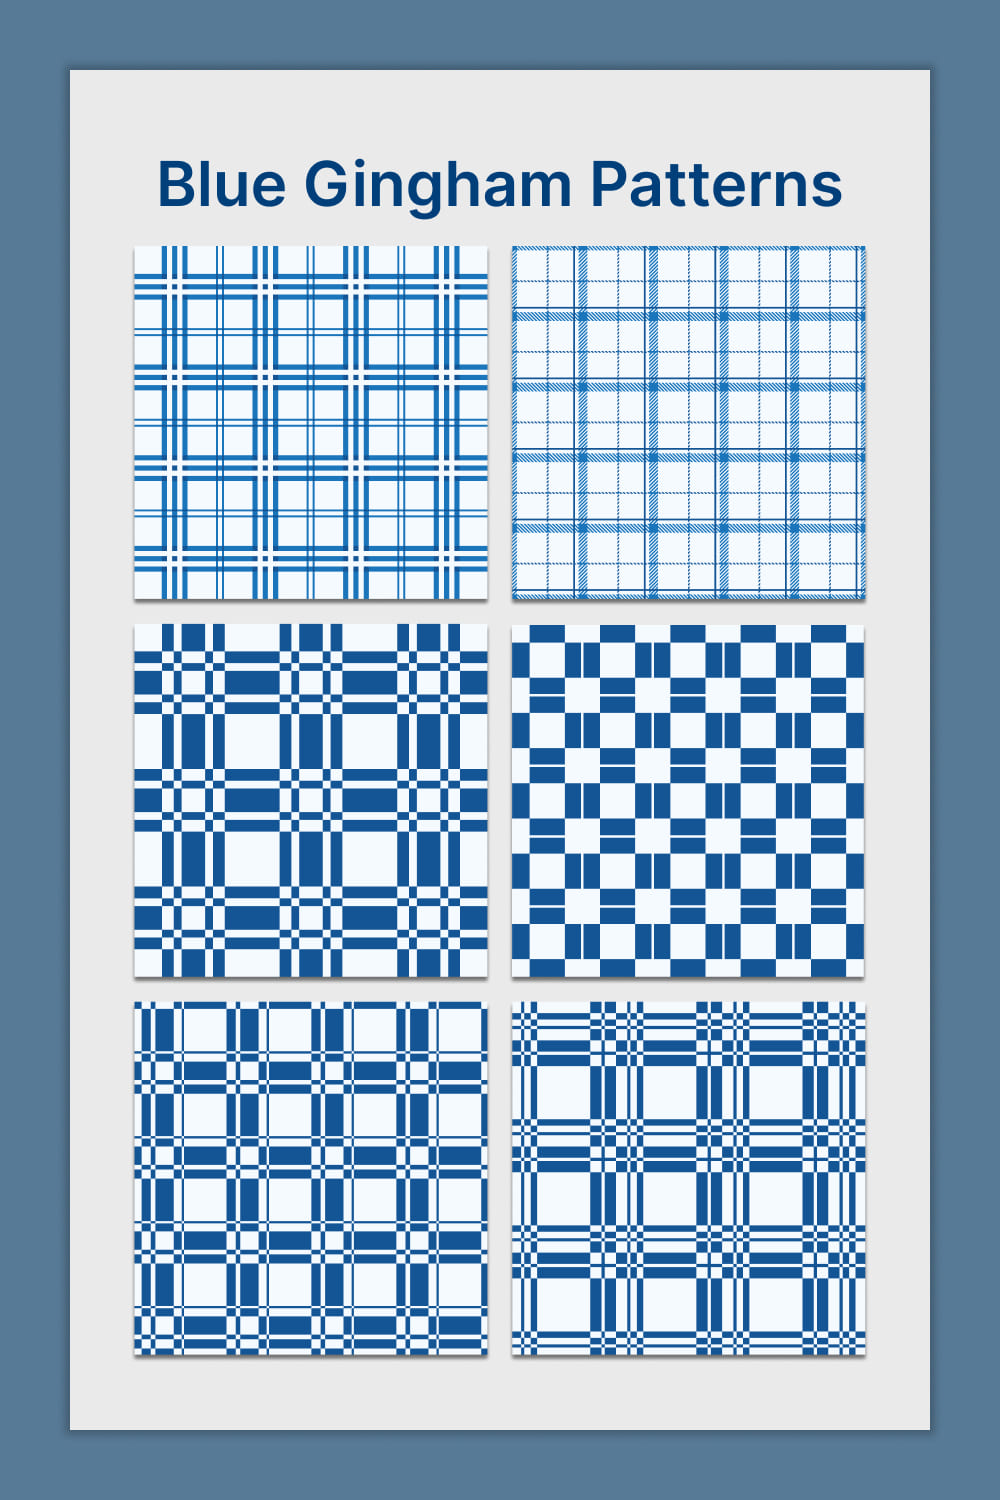 Blue pattern with diverse of gingham prints.